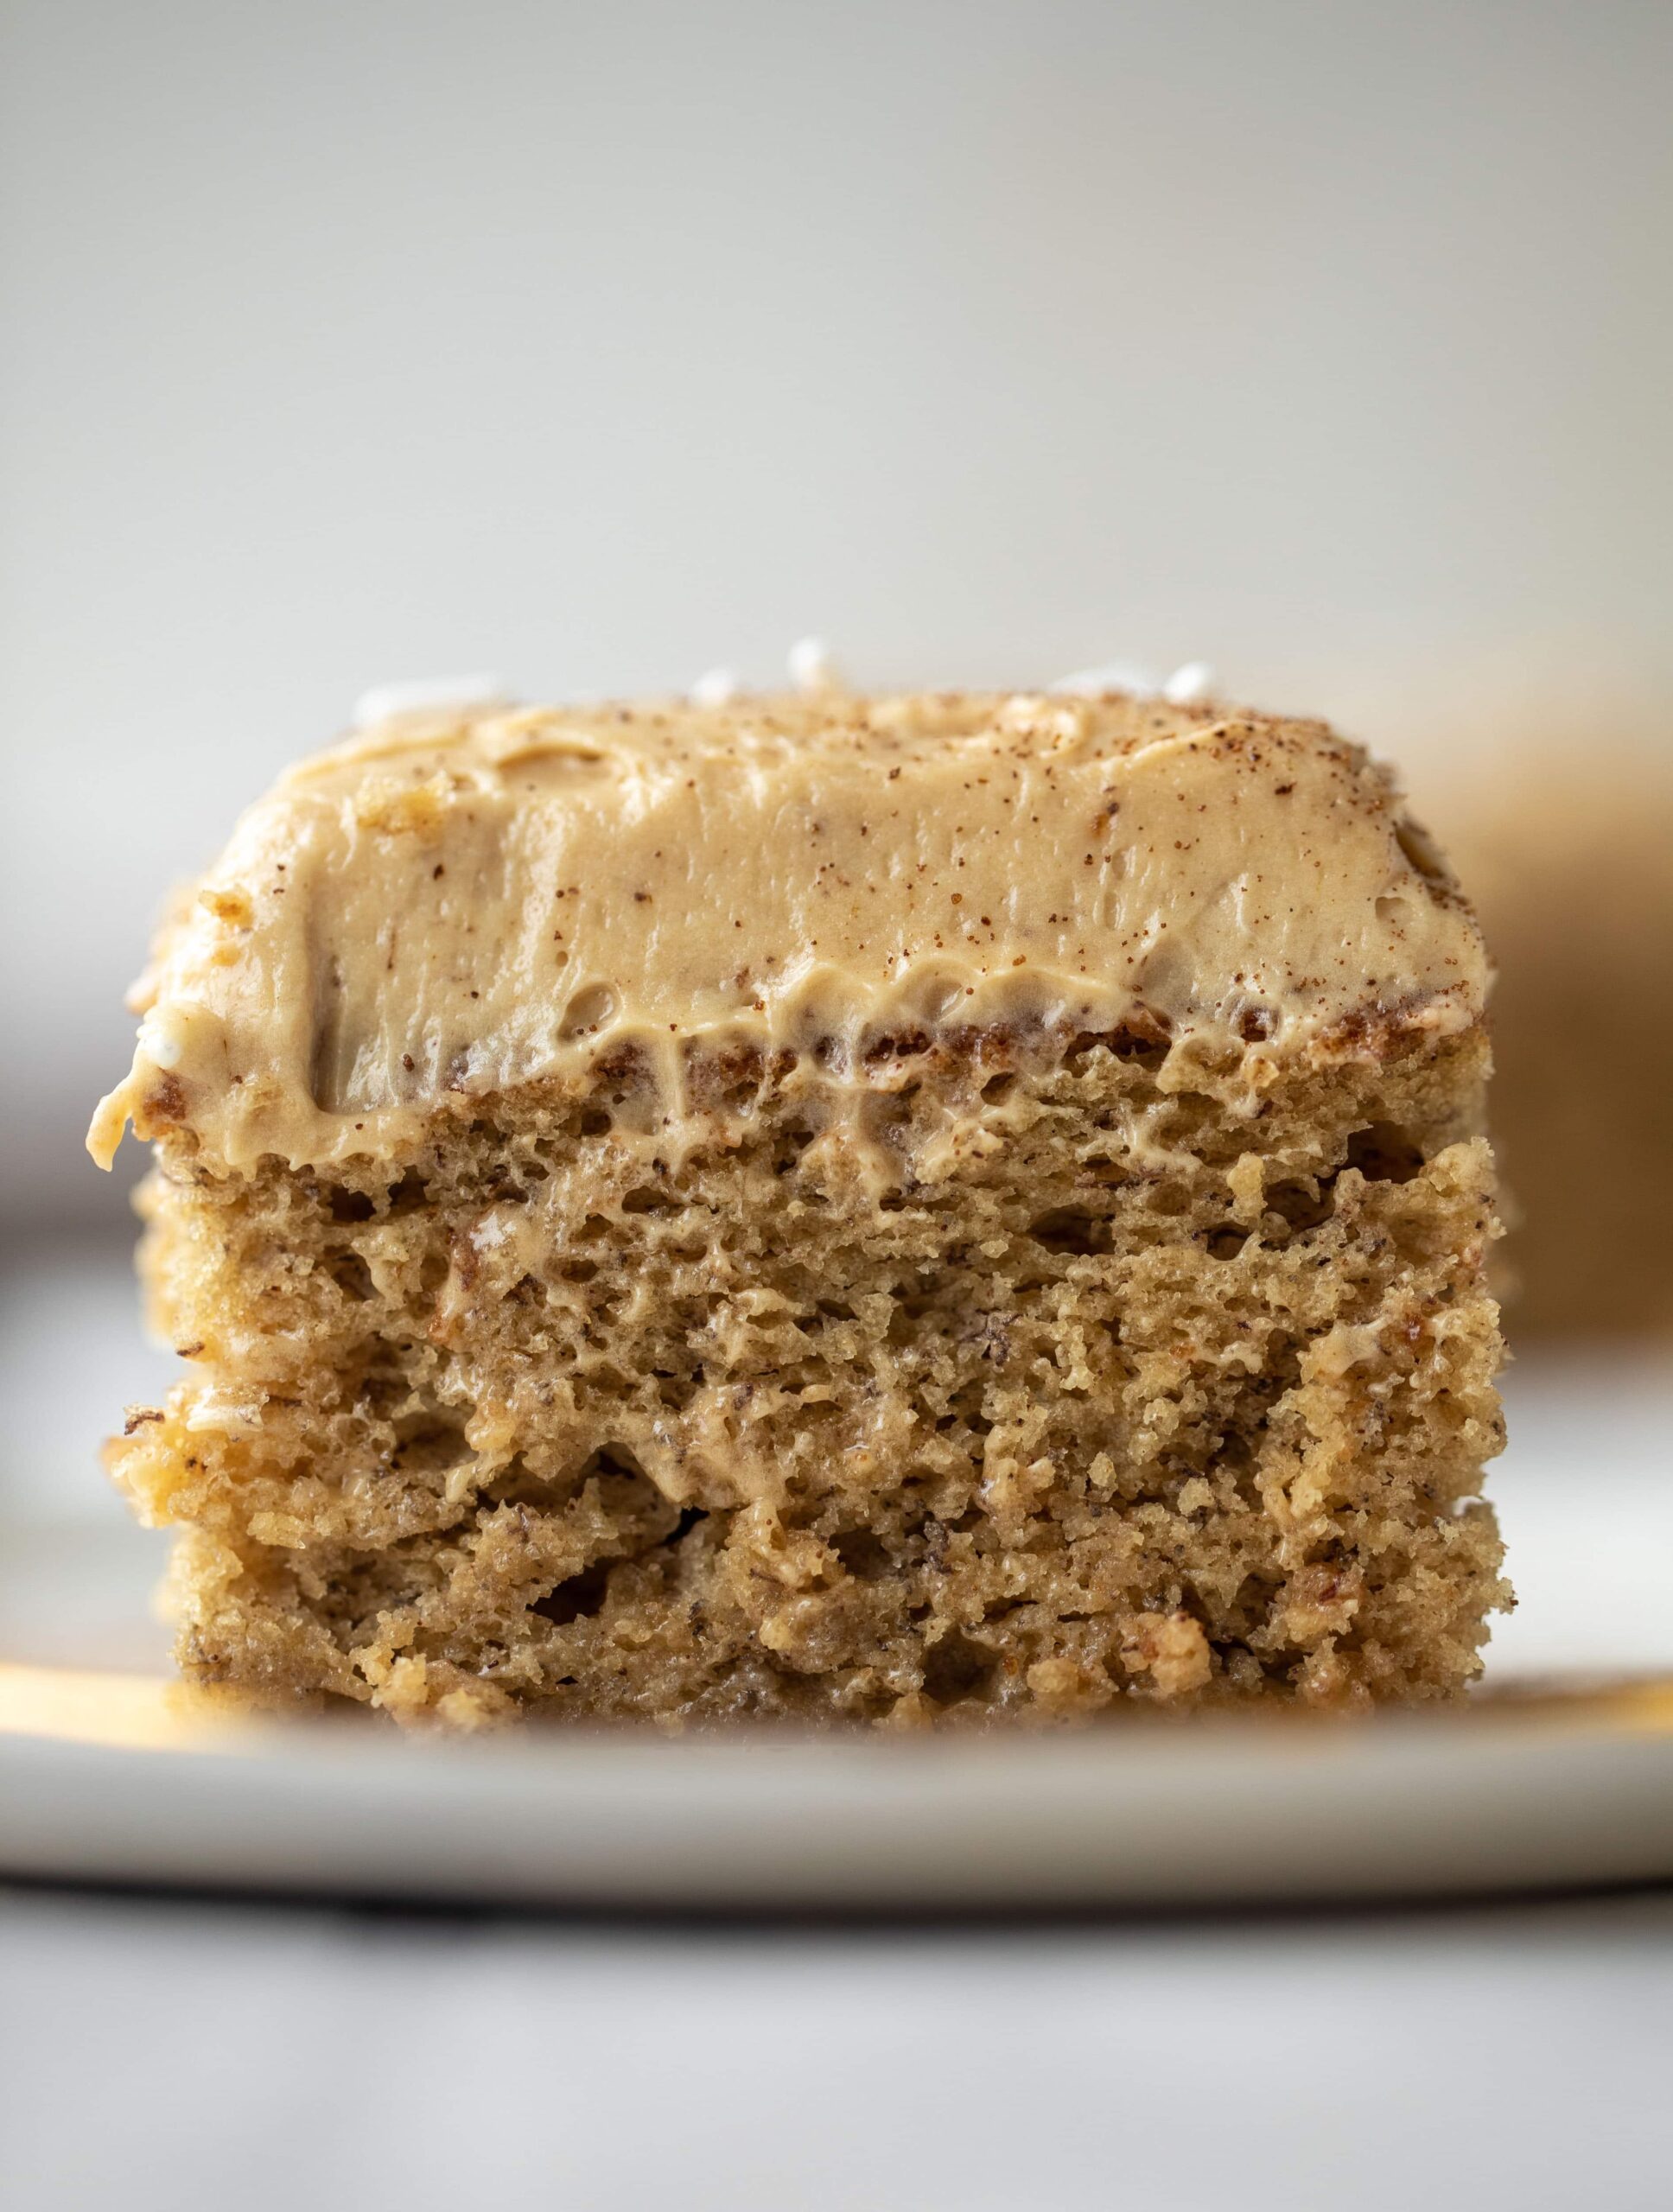  One bite and you're hooked: coffee and banana sponge cake